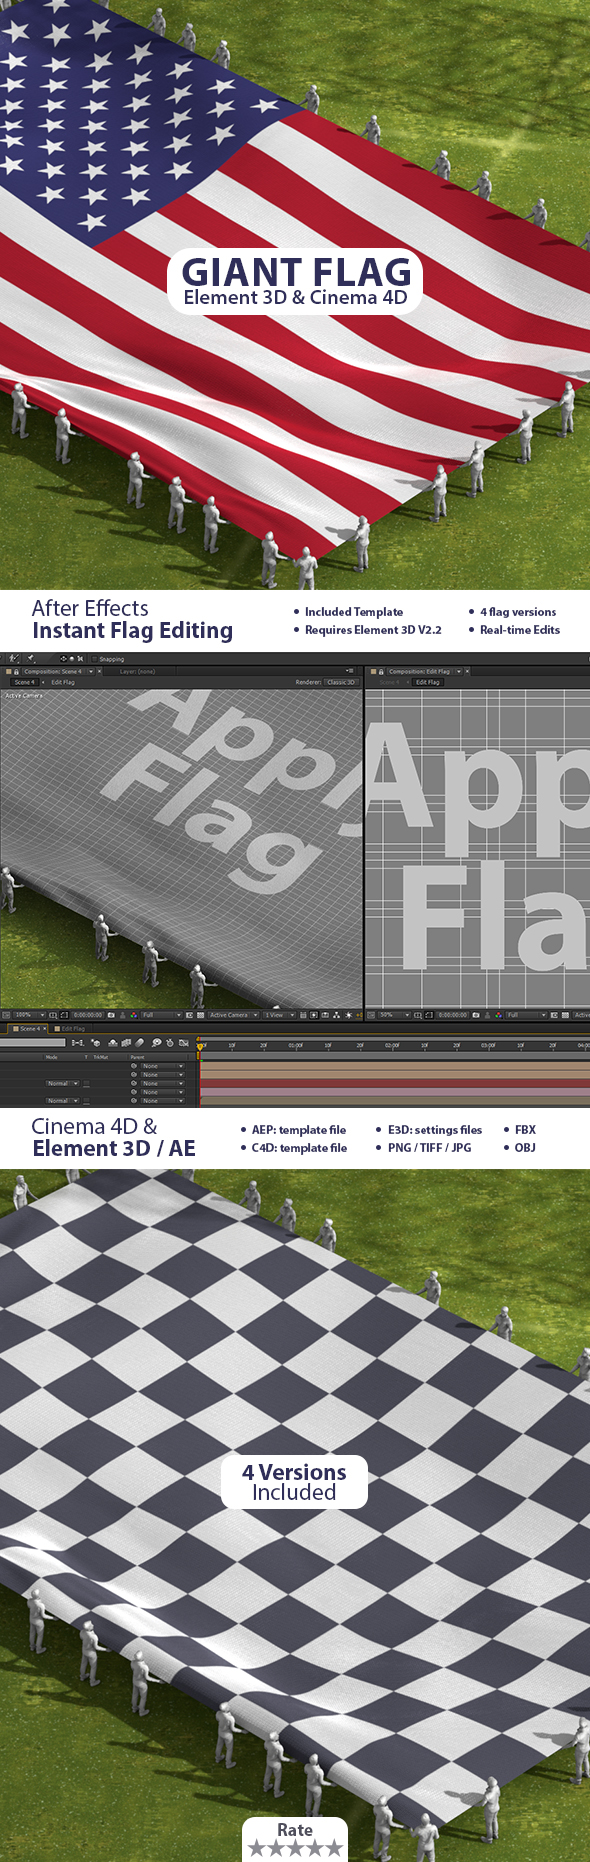 People Holding Giant Flag in Stadium for Cinema 4D - After Effects